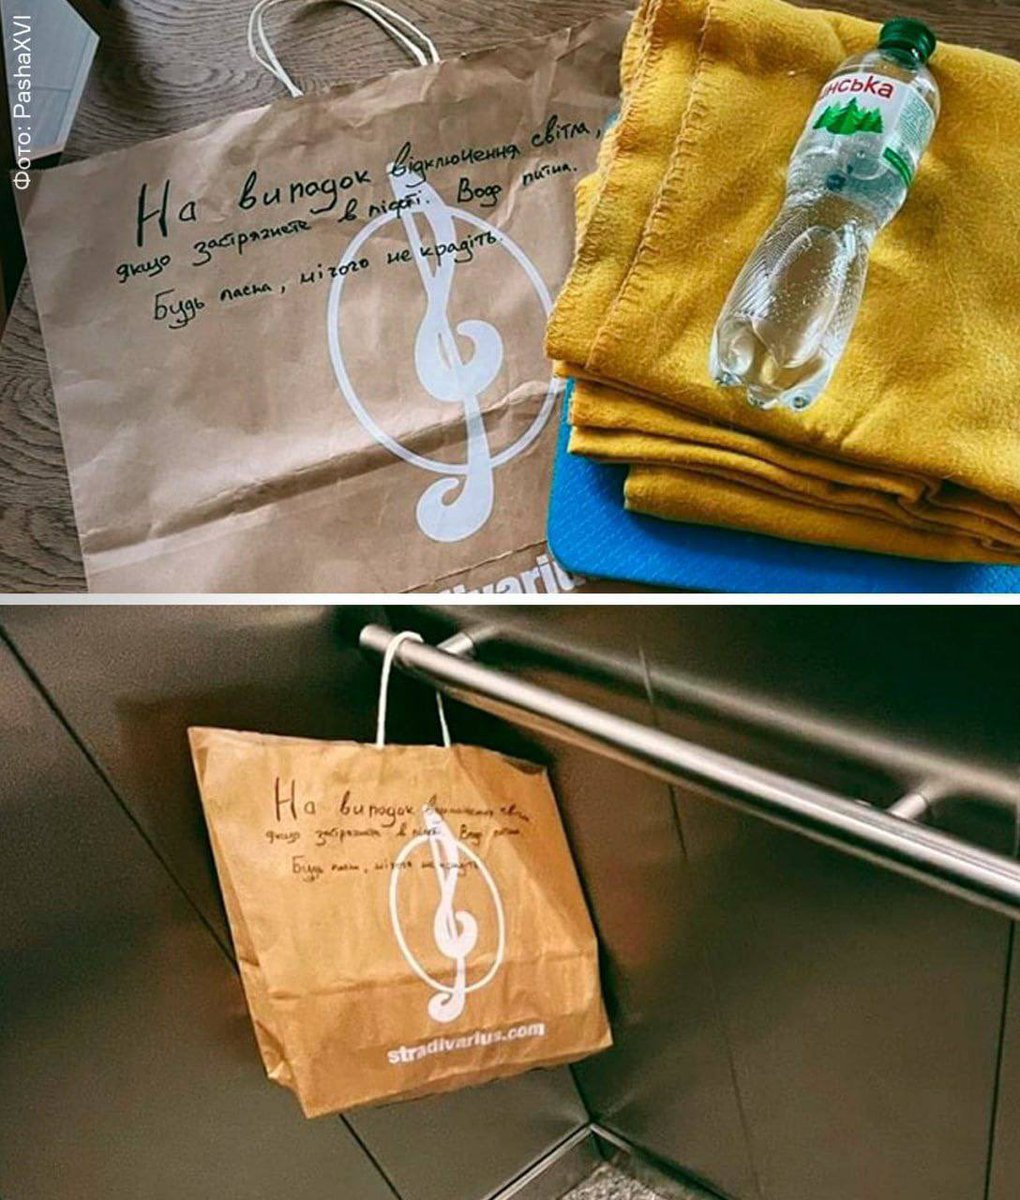 amid blackouts triggered by russian terrorist attacks, ukrainians leave these first-aid packages in elevators in case someone gets trapped by a power outage. ukraine is unbreakable